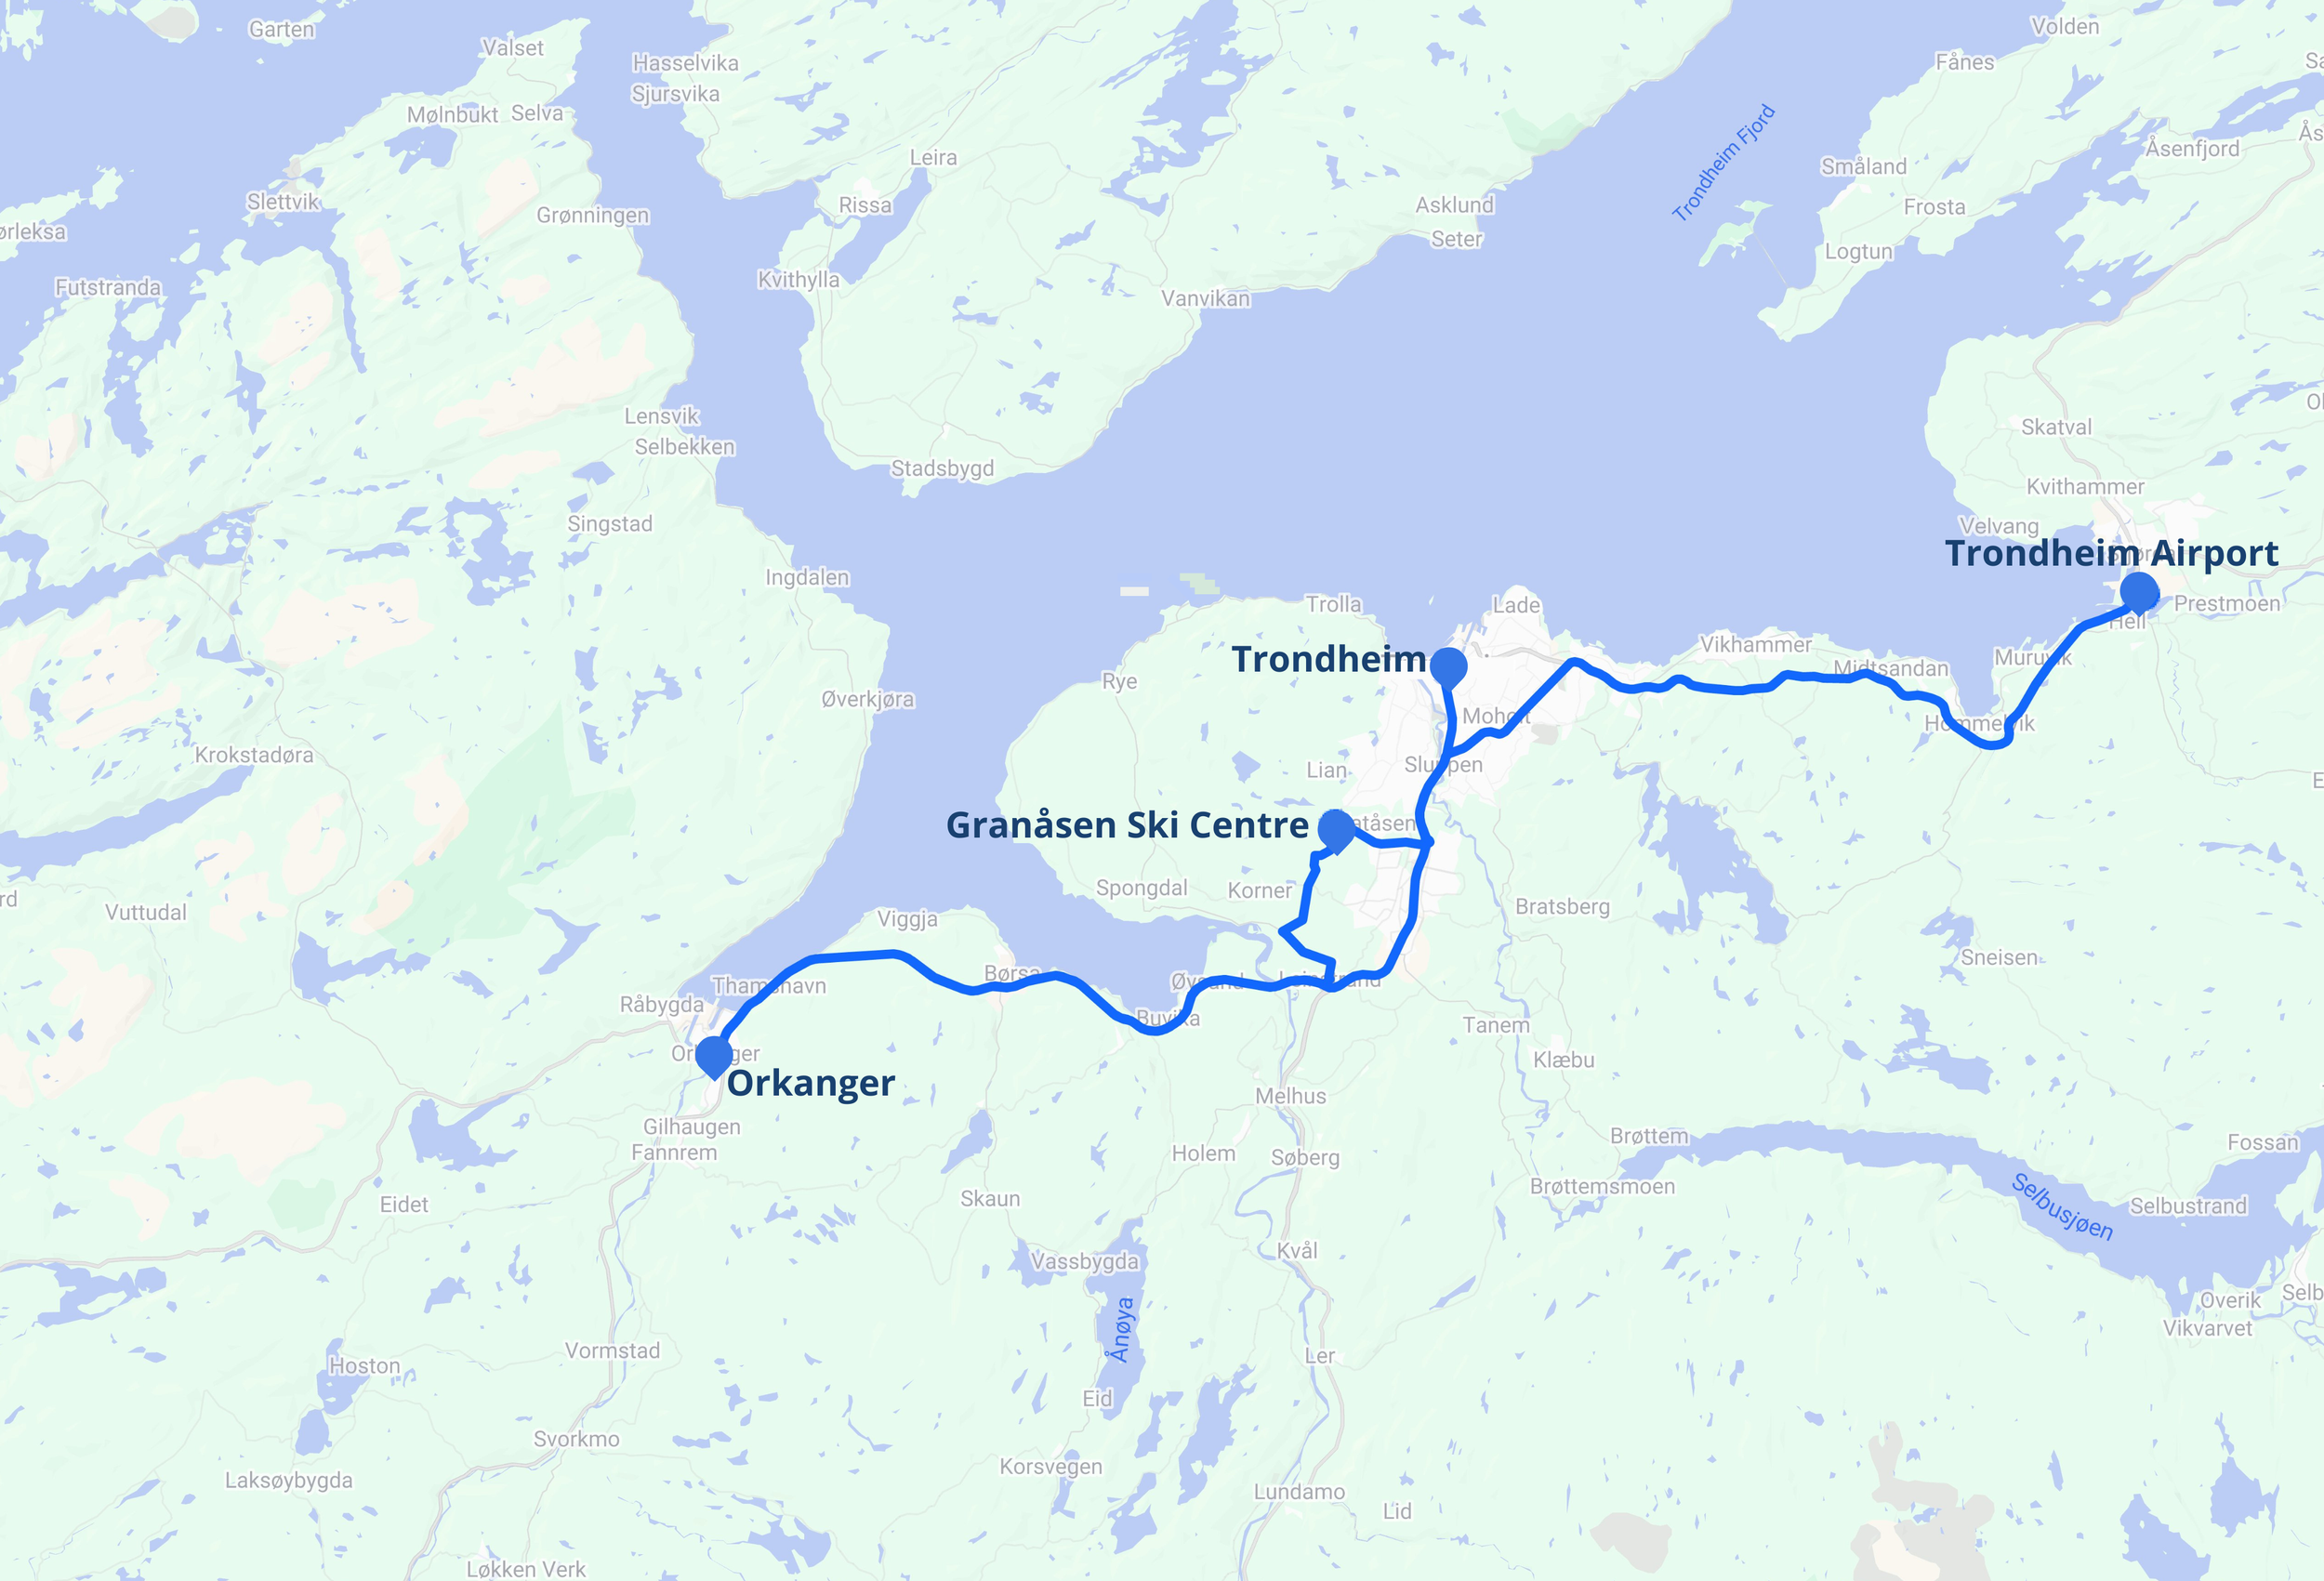 Ground transportation during the trip, starting and finishing in Trondheim